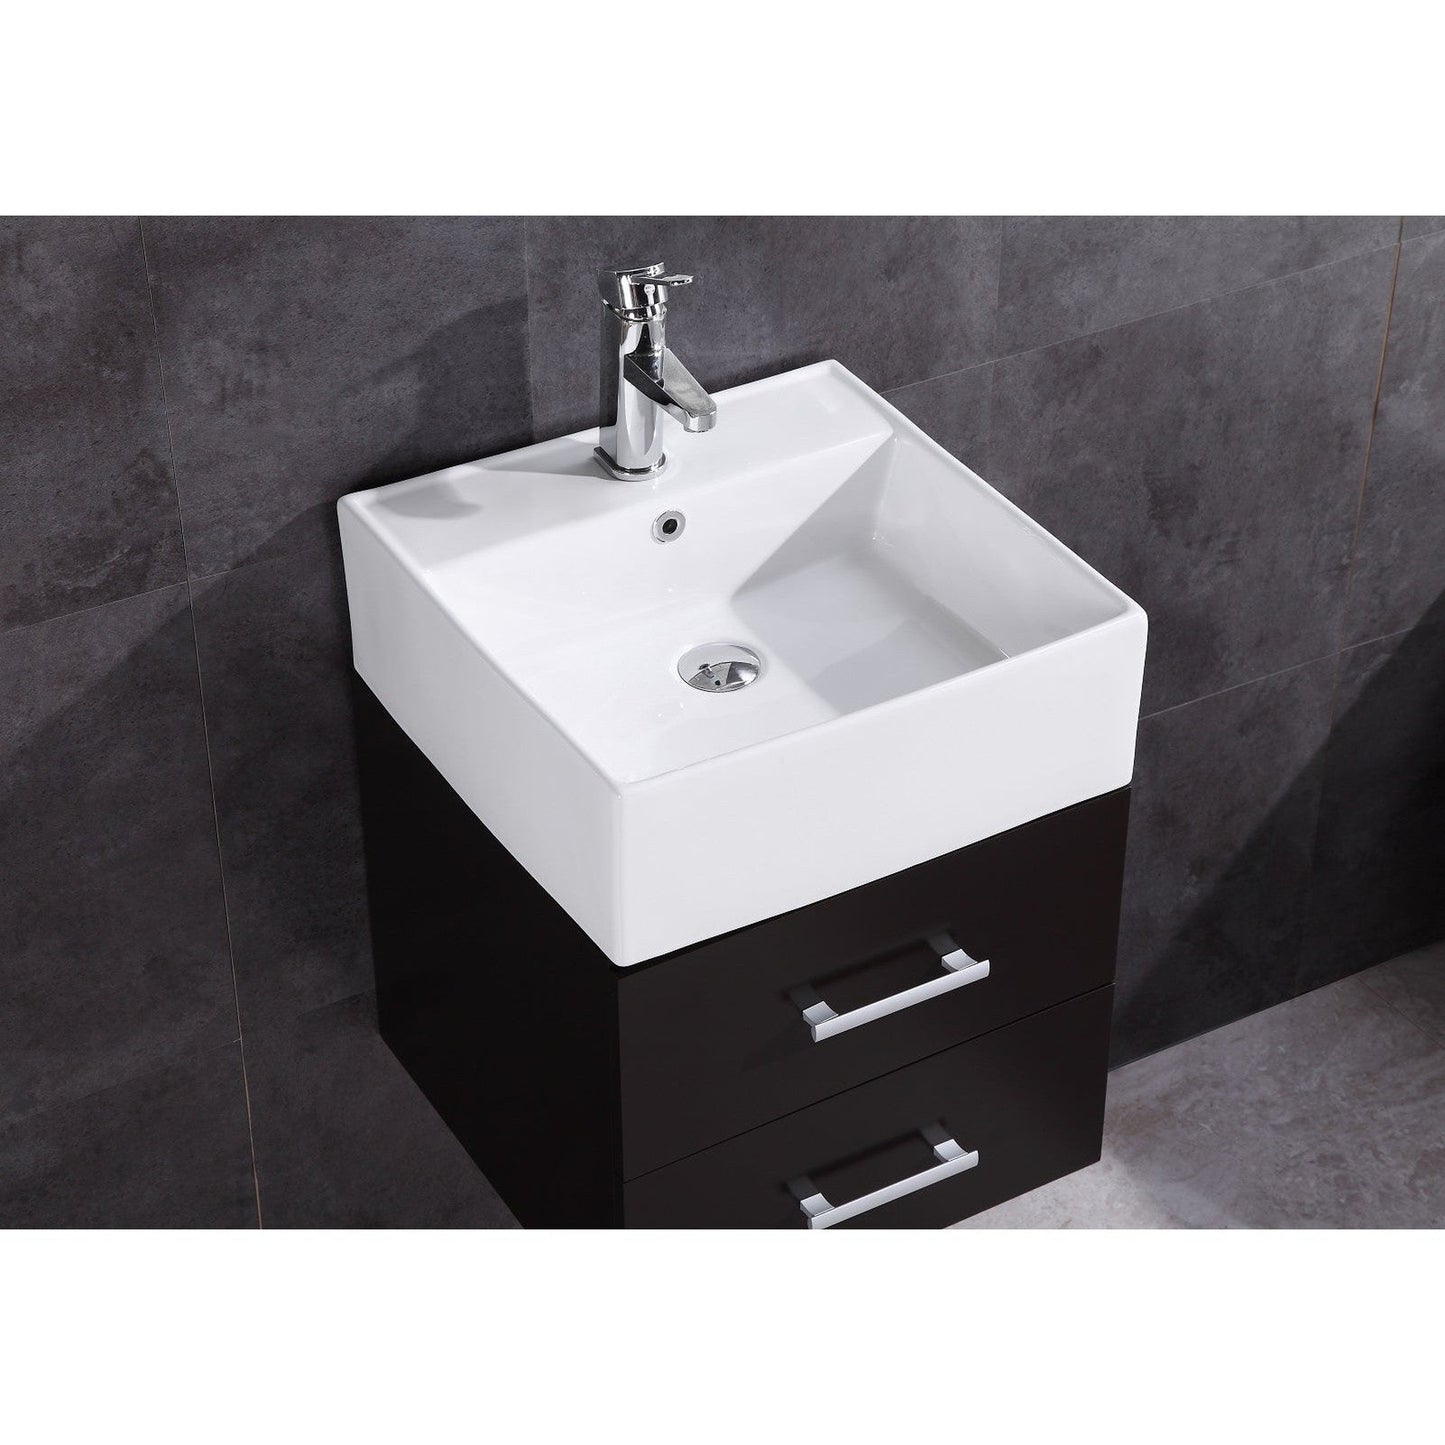 Legion Furniture WT9188 18" Espresso Wall Mounted PVC Vanity Cabinet With White Top and Ceramic Sink